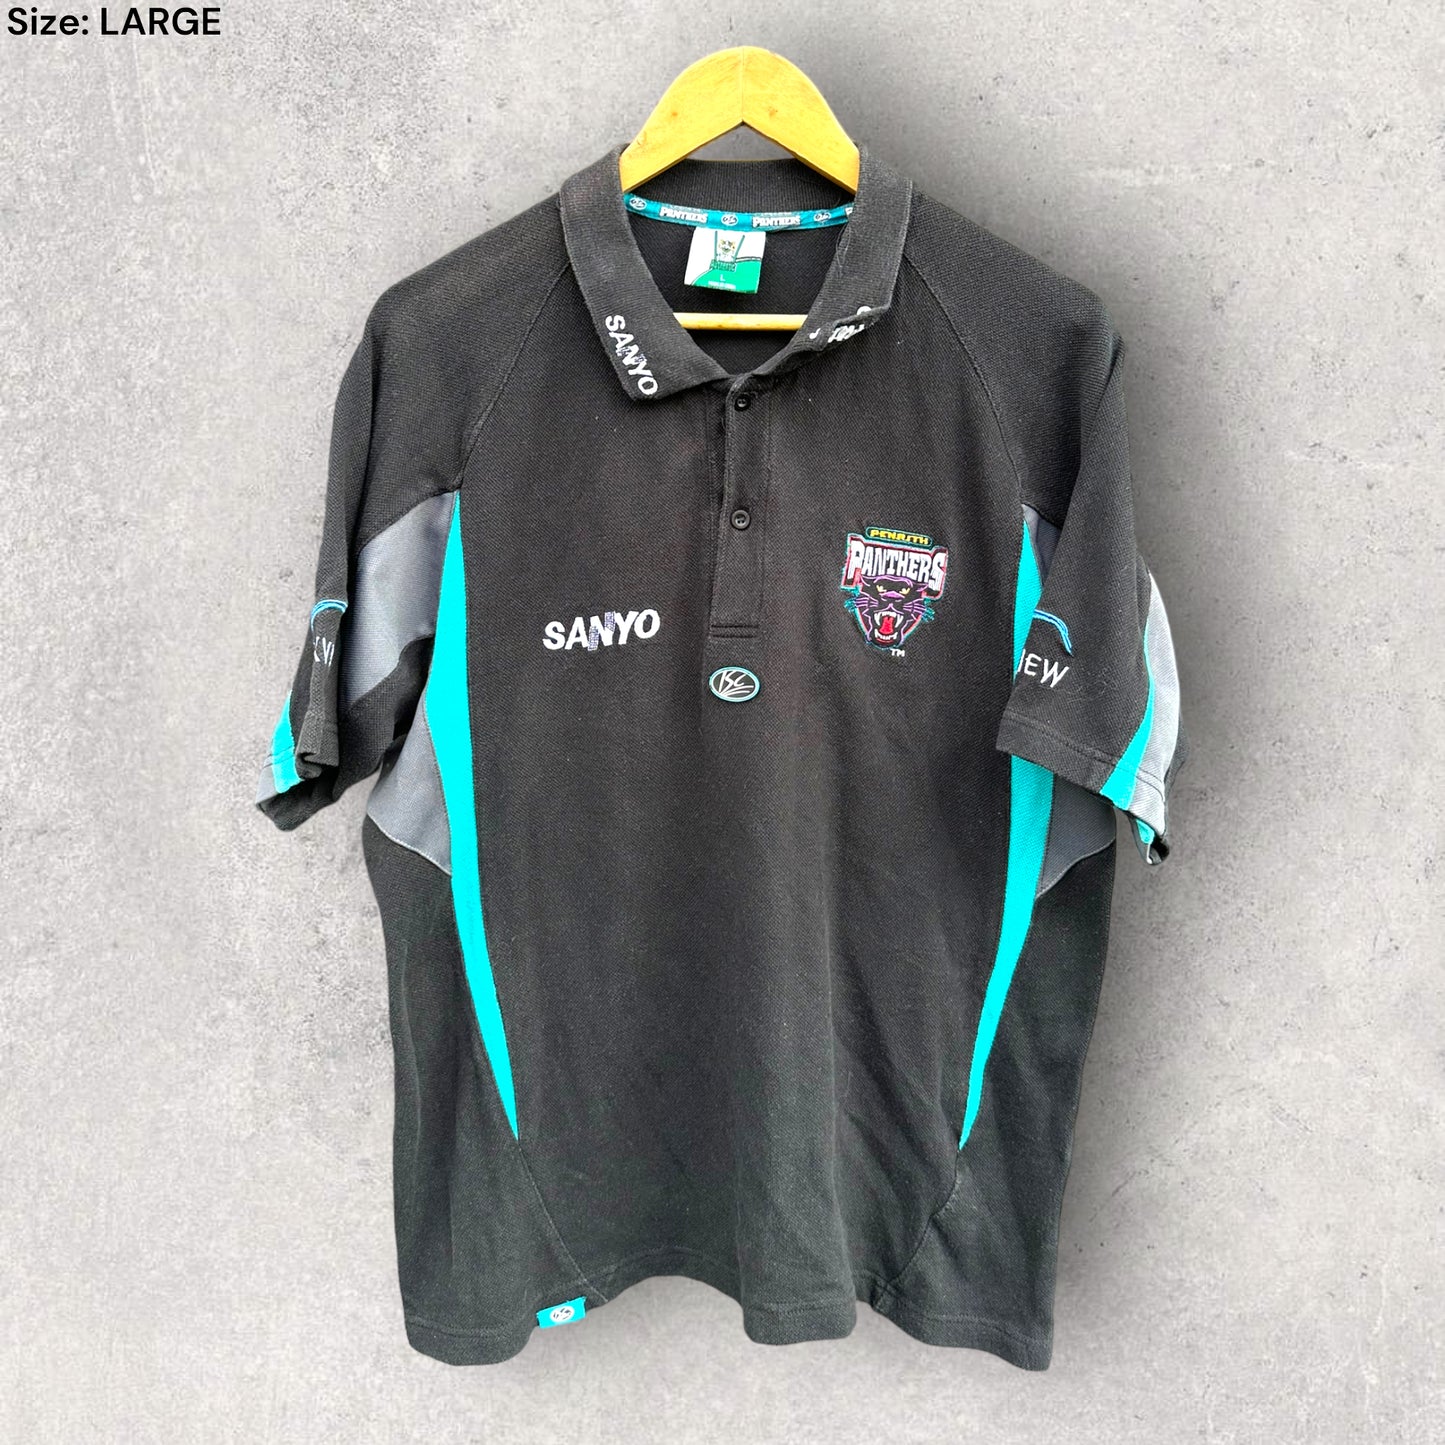 PENRITH PANTHERS ISC SANYO POLO SHIRT